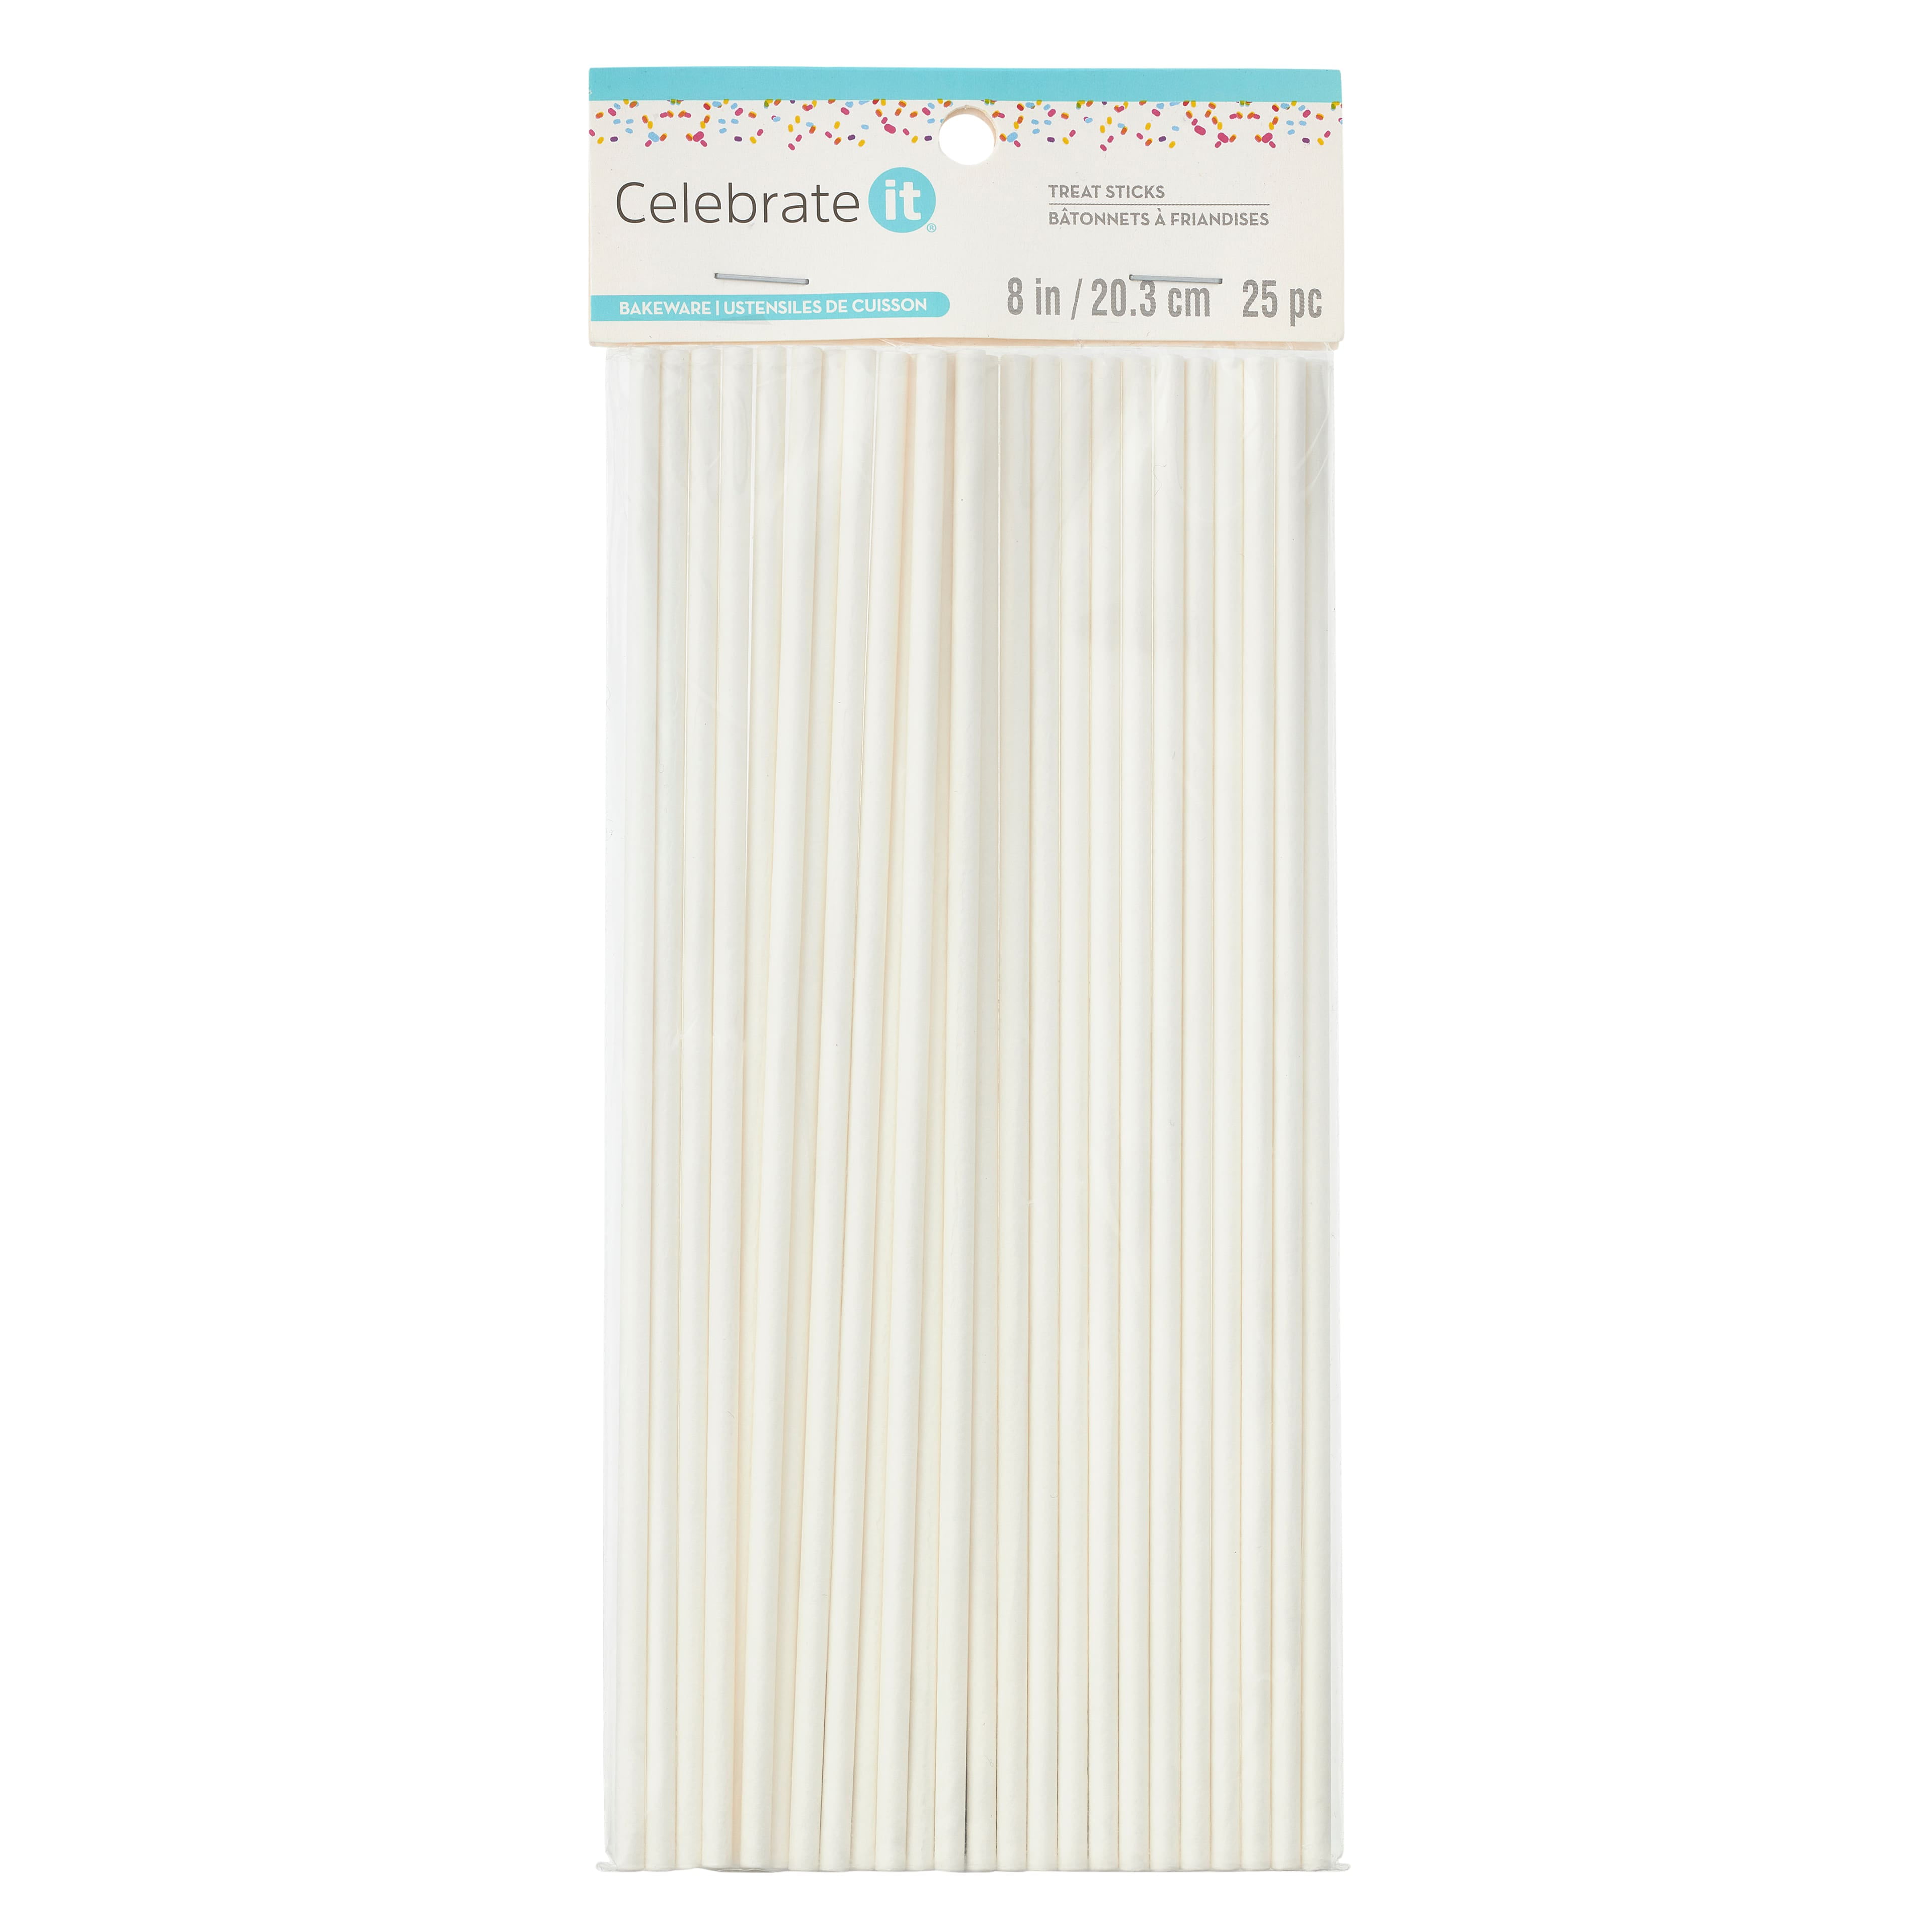 12 Packs: 25 ct. (300 total) Reusable Popsicle Sticks by Celebrate It™